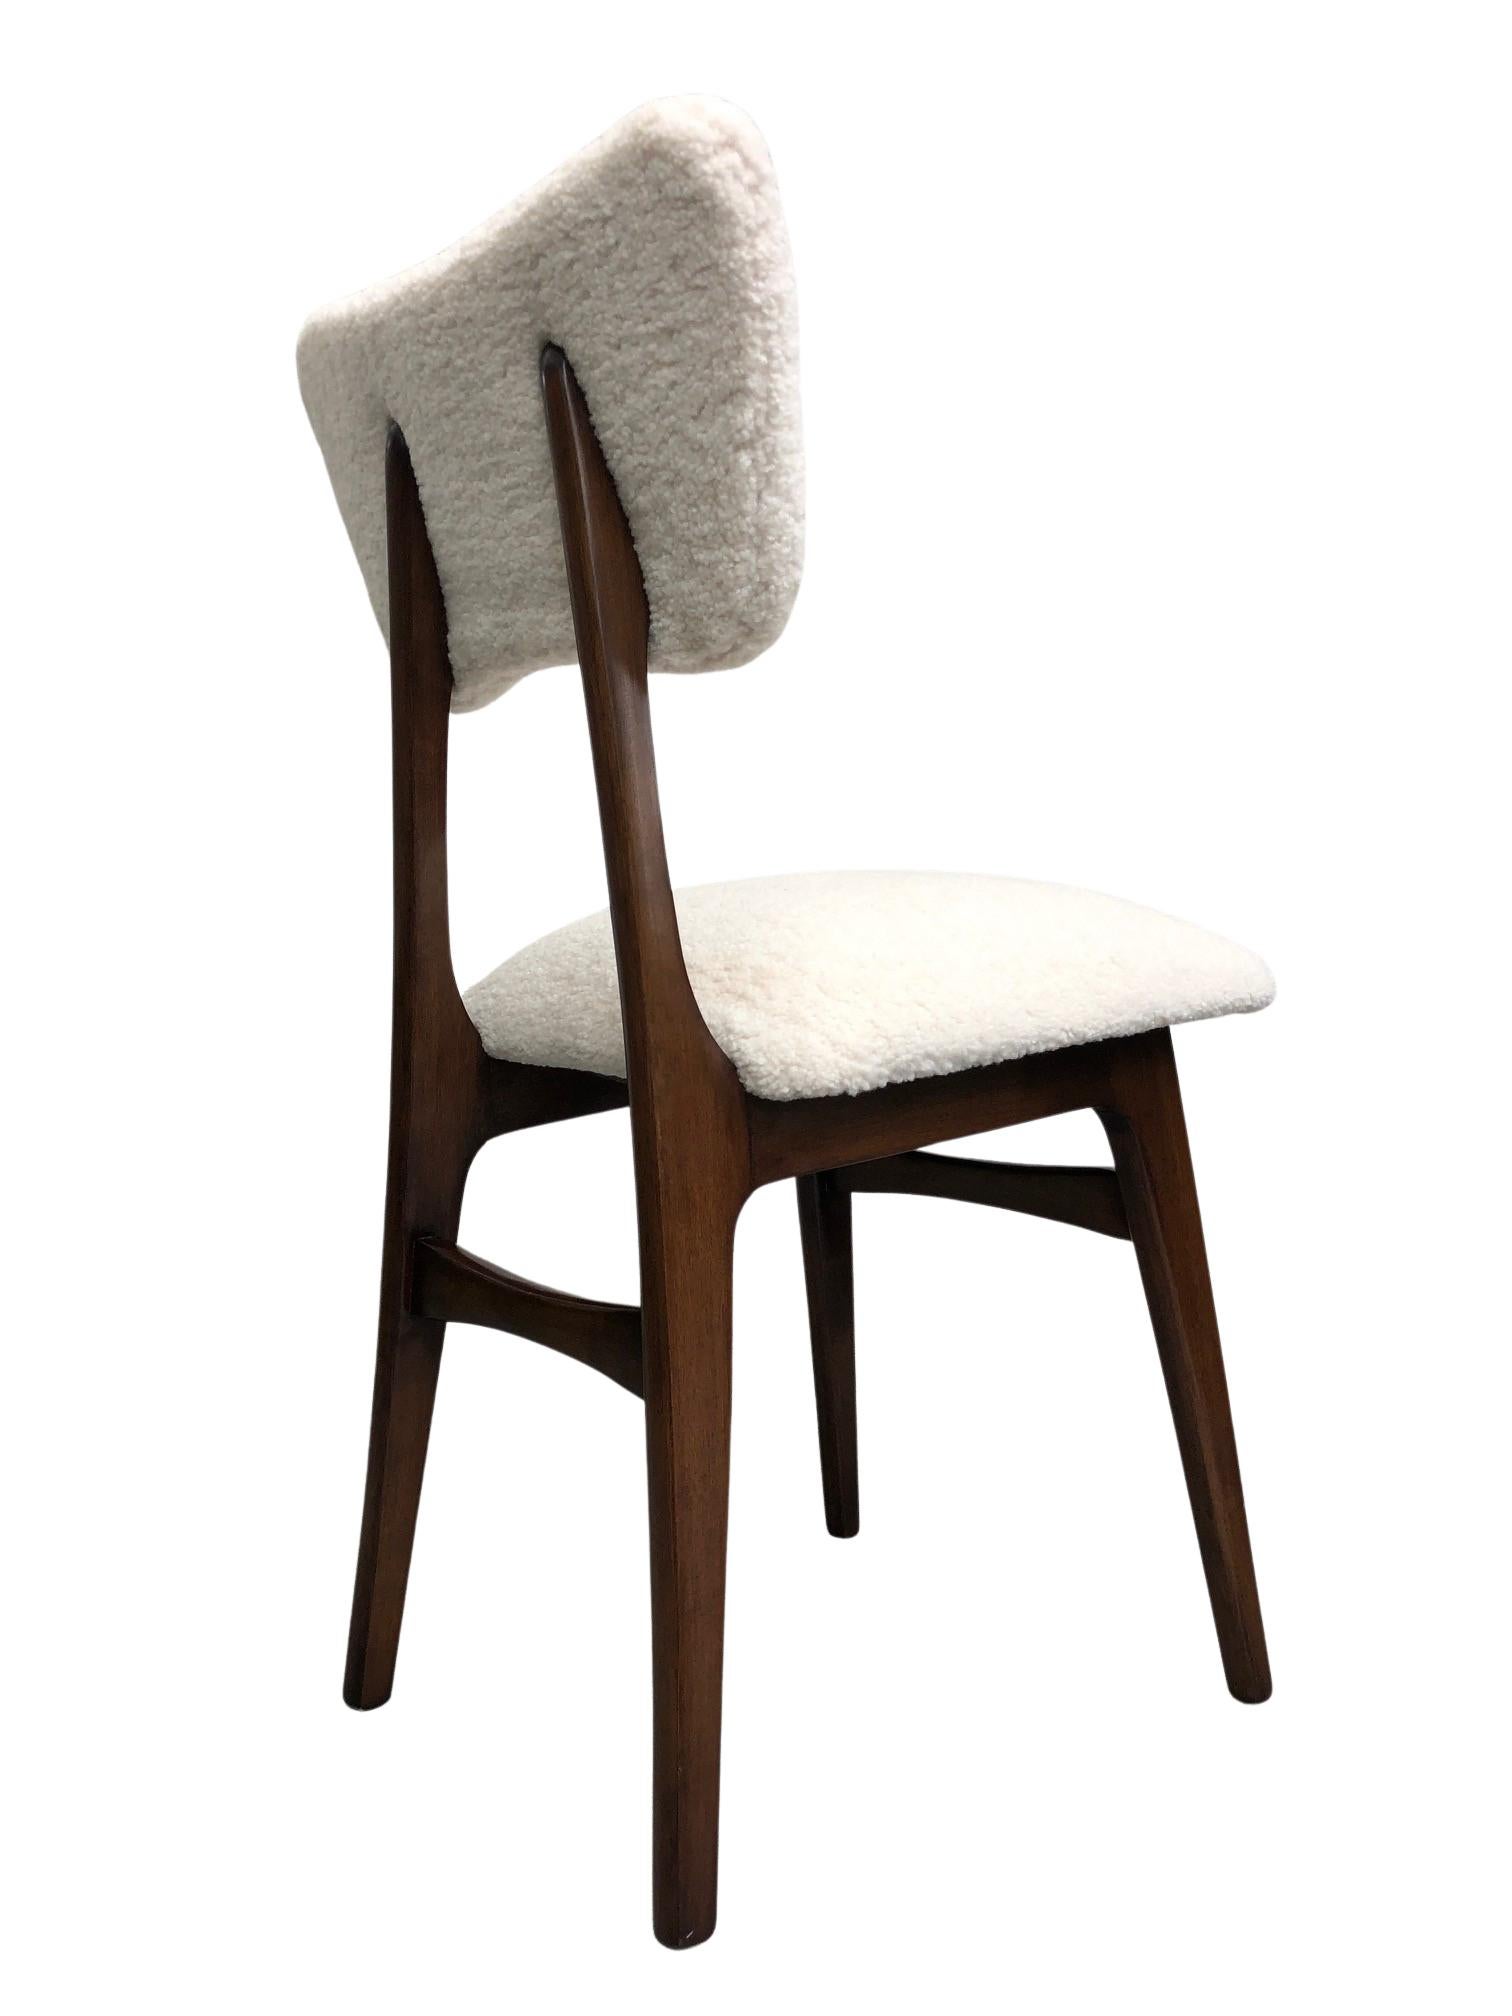 Unique chairs manufactured in Poland in the 1960s, designed by Rajmund Halas. 

The upholstery is made of pleasant to touch bouclé textile. It is high quality and durable italian fabric in a light beige color. The chair structure is made of